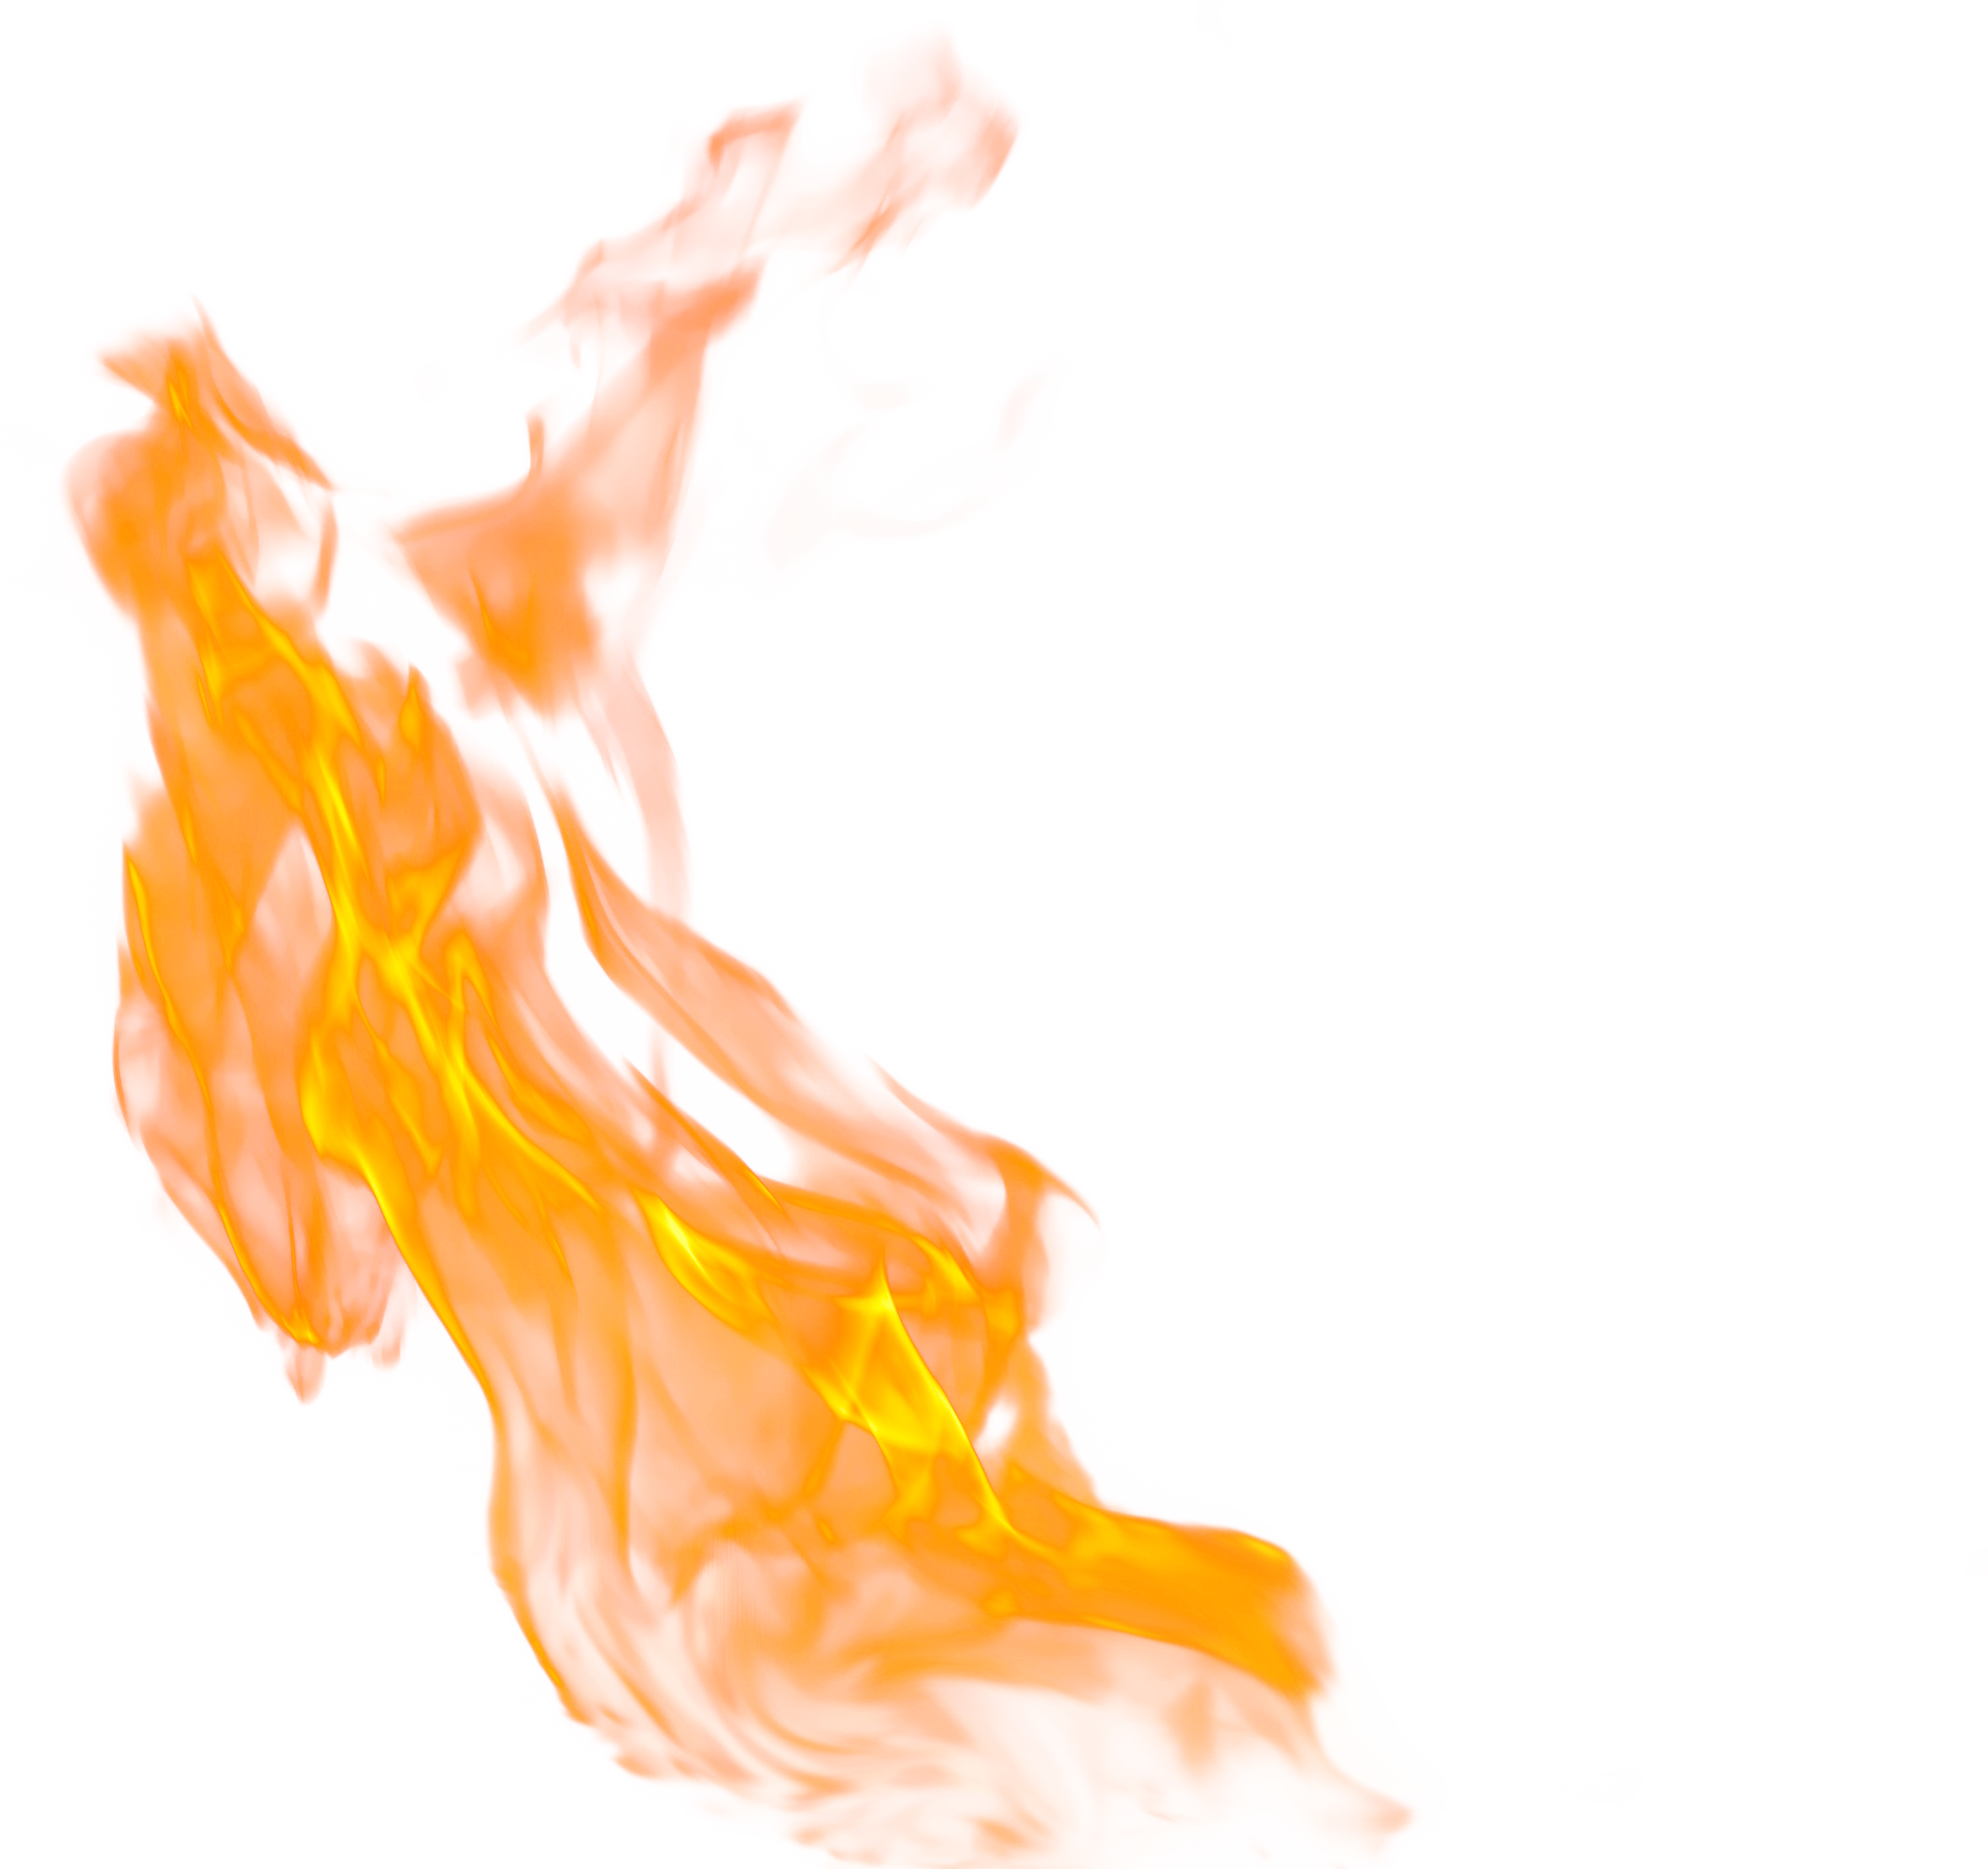 Fire Flame PNG Image - PurePNG | Free transparent CC0 PNG ...